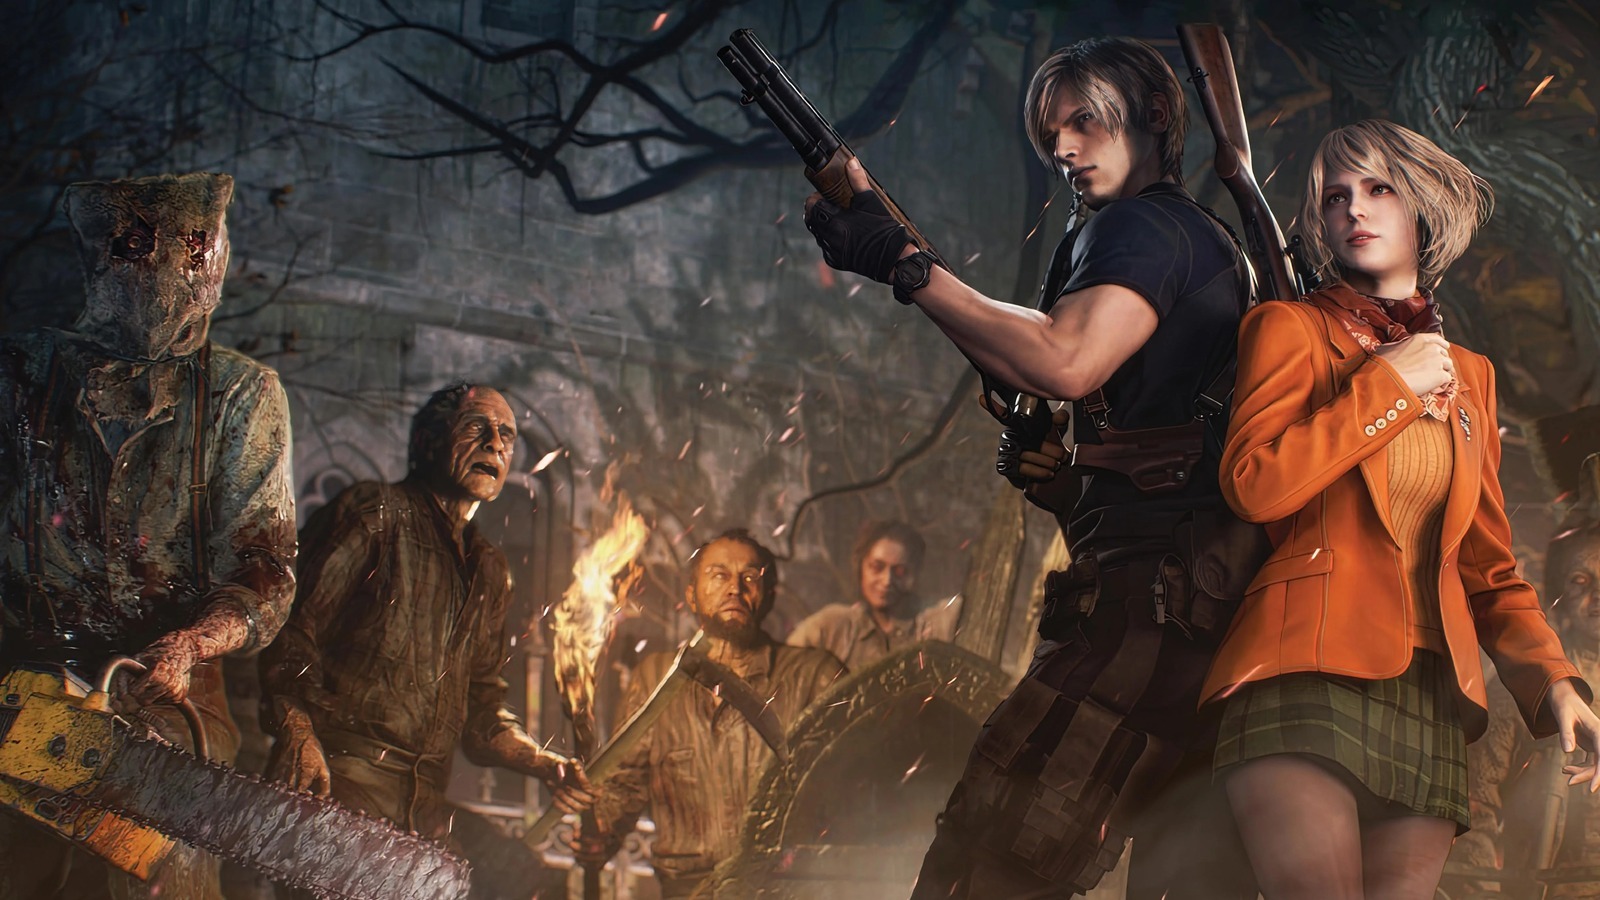 Original Resident Evil 4 director shares his thoughts on the